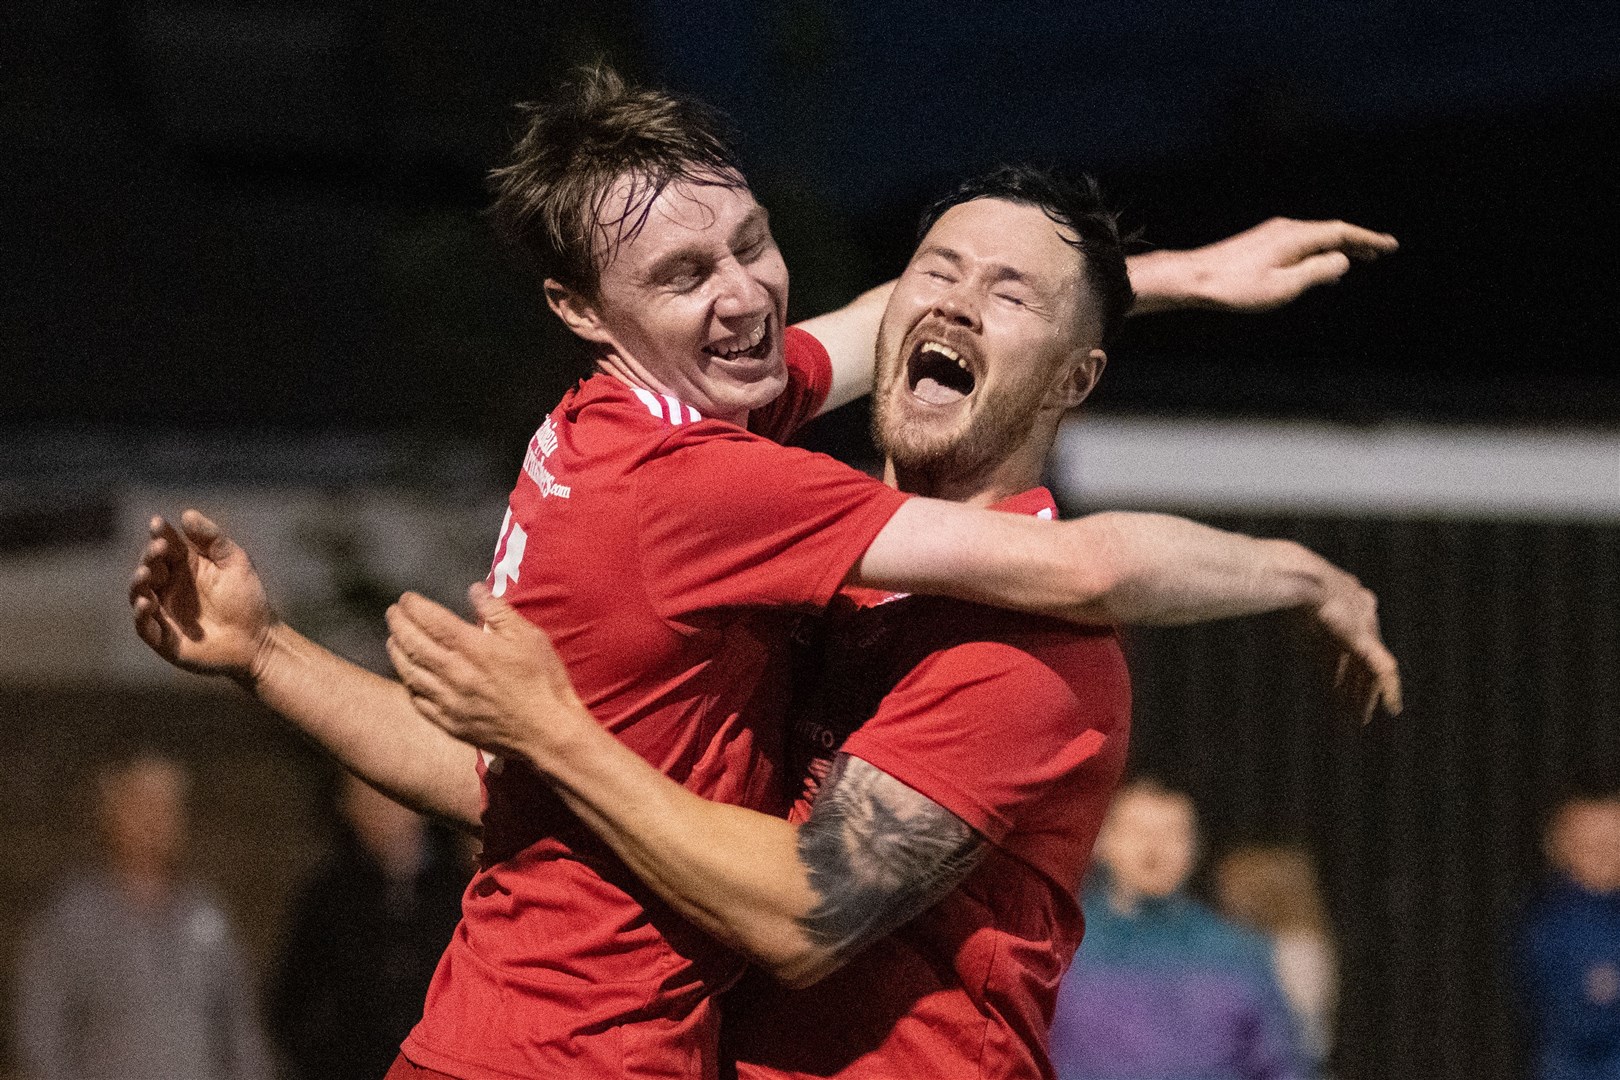 Lossiemouth's Baylee Campbell (left) celebrates his goal with Adam Macleod...Lossiemouth FC (4) vs Strathspey Thistle (2) - Highland Football League 22/23 - Grant Park, Lossiemouth 24/08/2022...Picture: Daniel Forsyth..